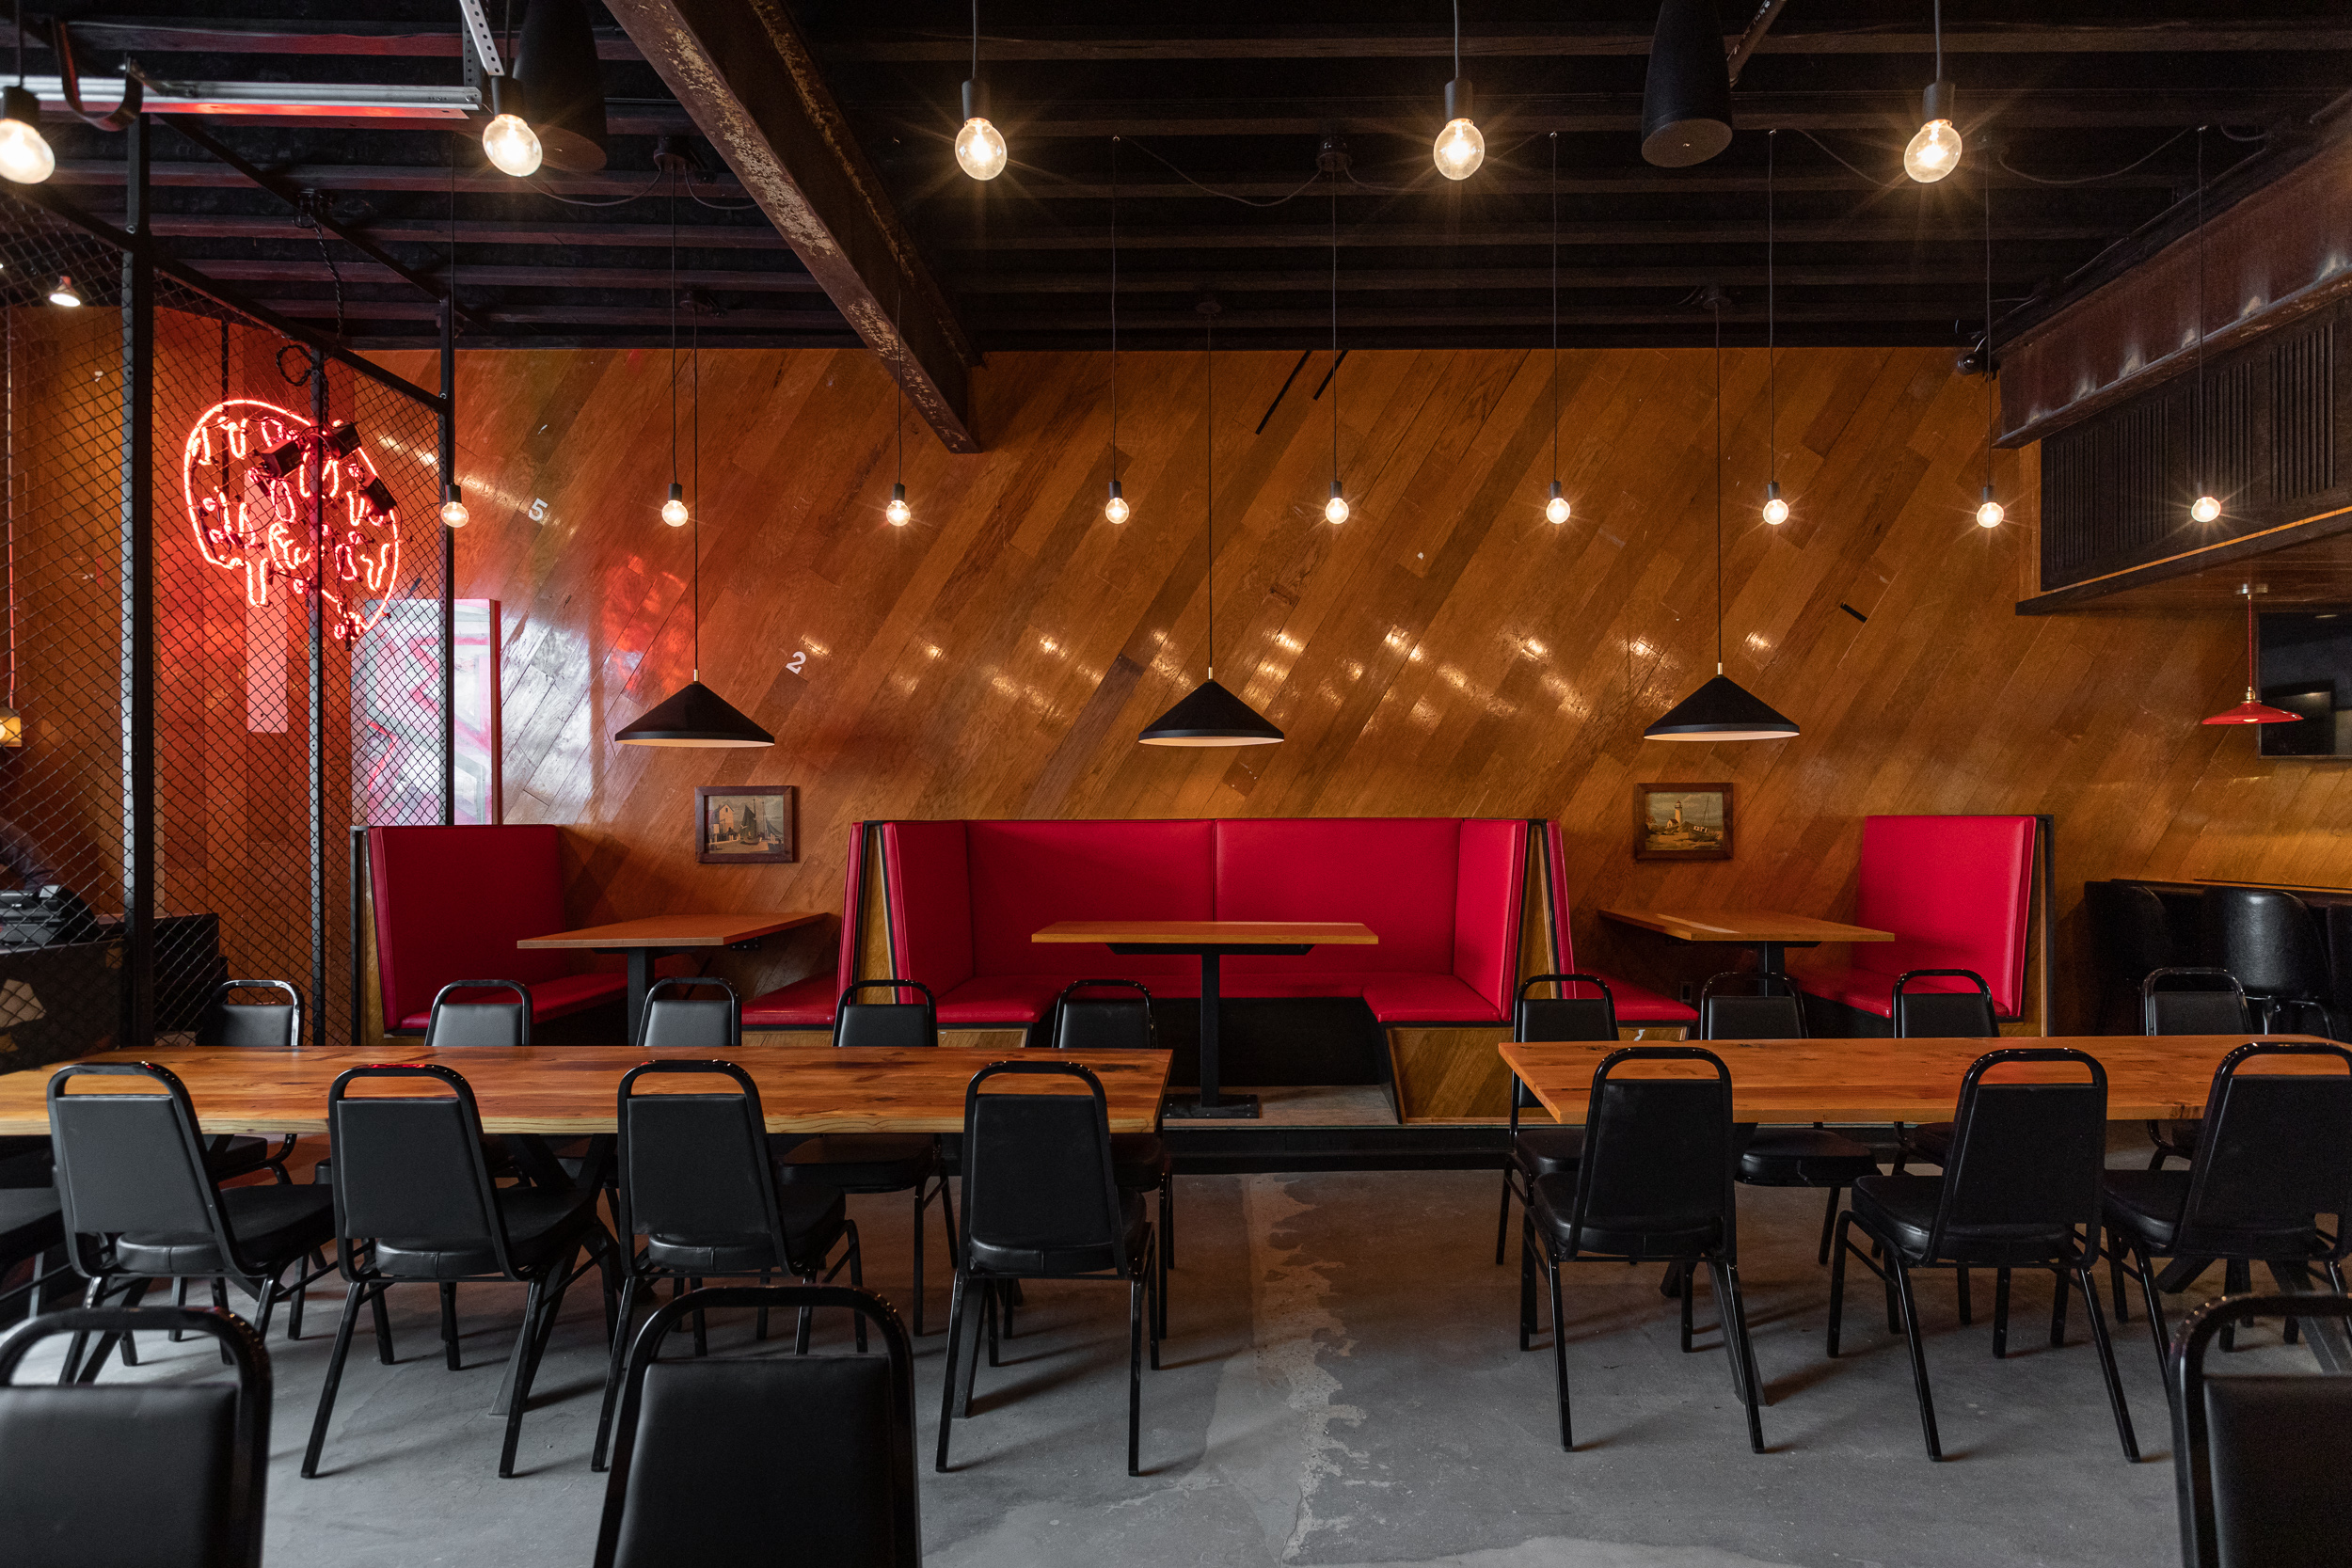 Wood paneled walls are lined with red booths, with long wood tables surrounded by eight chairs each at the center of the dining room.